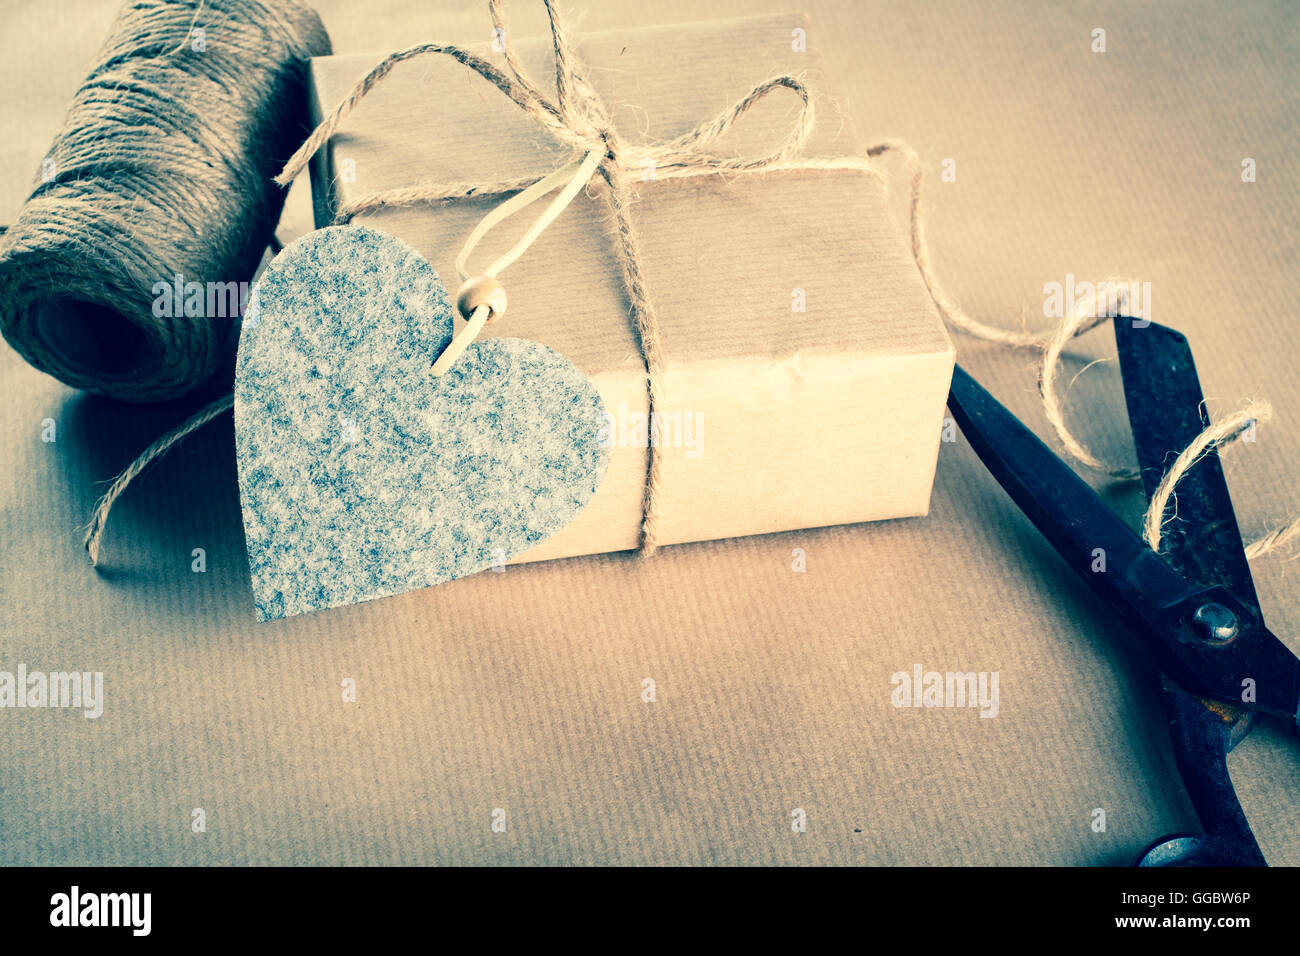 Scissors, Tape, Ribbon And Wrapping Paper On A Gift Box. Focus On